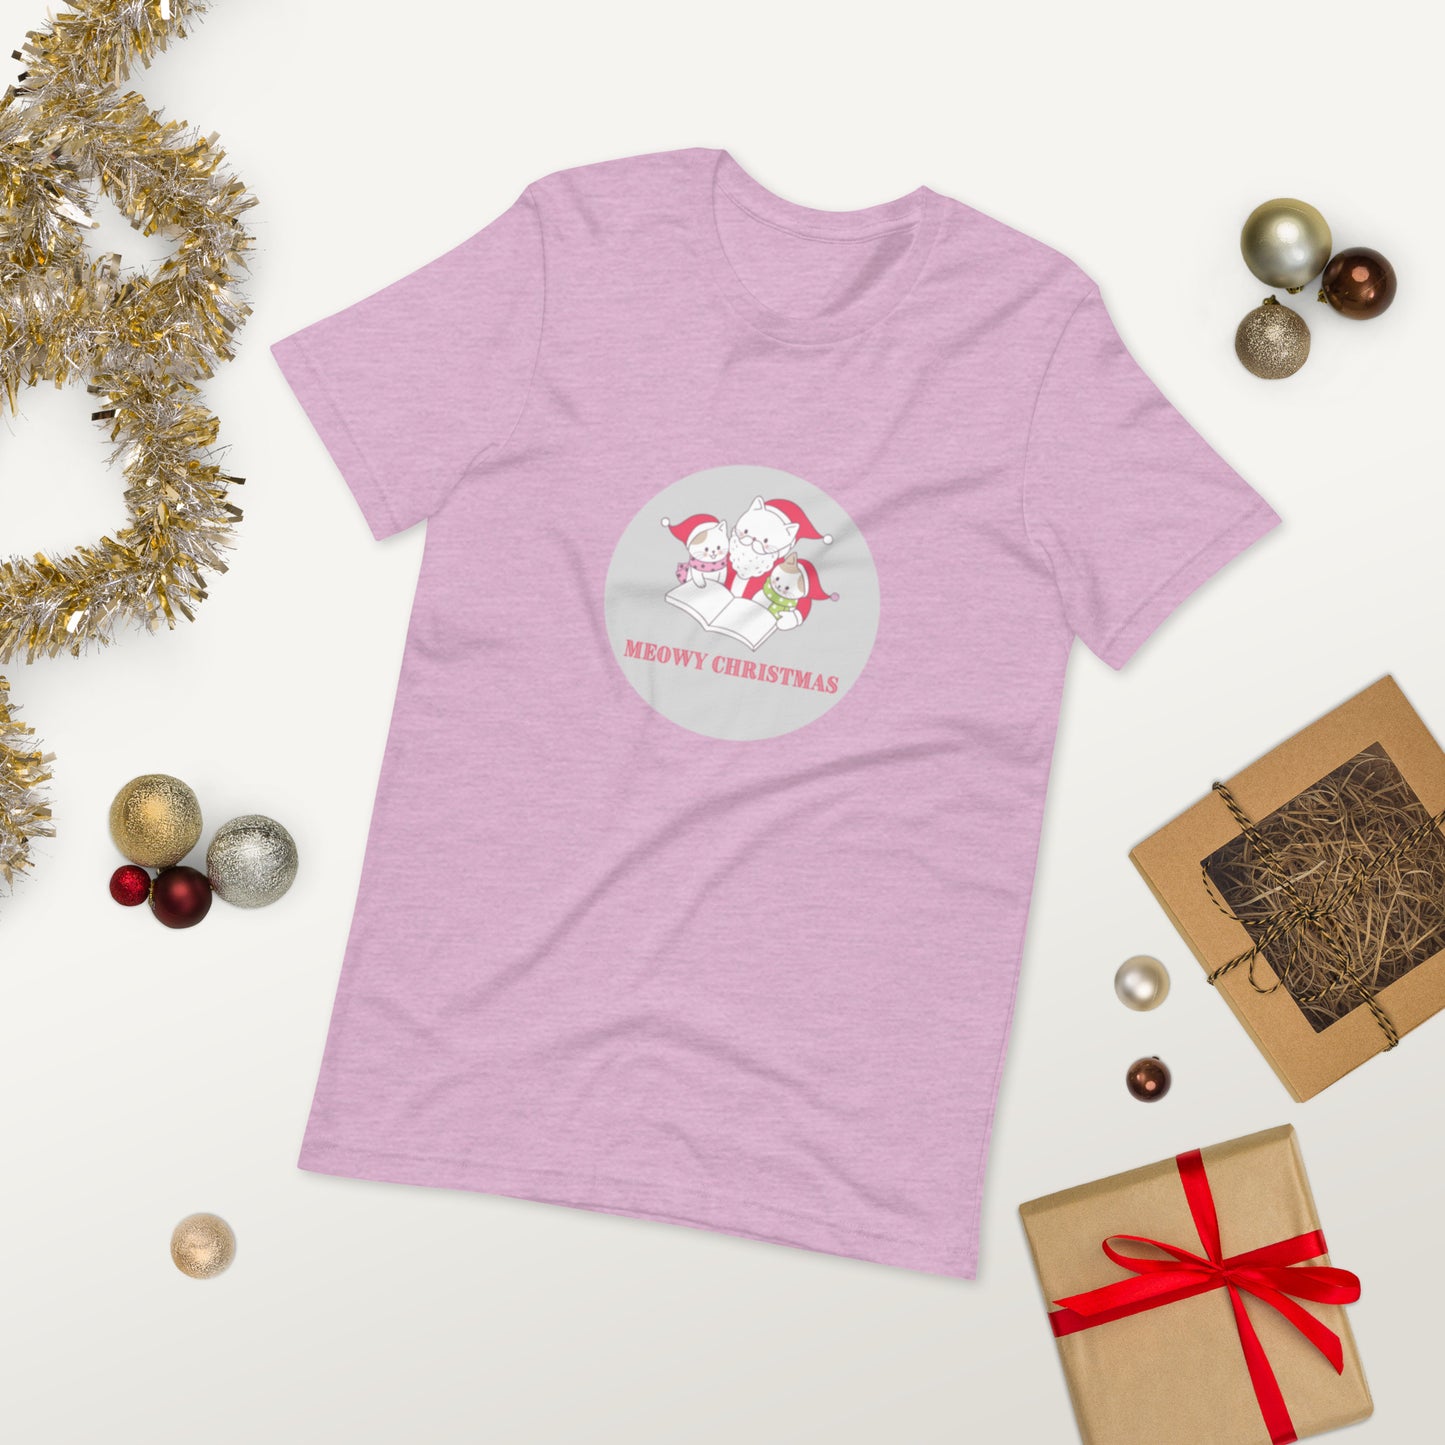 Meowy Christmas Unisex T-Shirt - The Spinster Librarian Shop